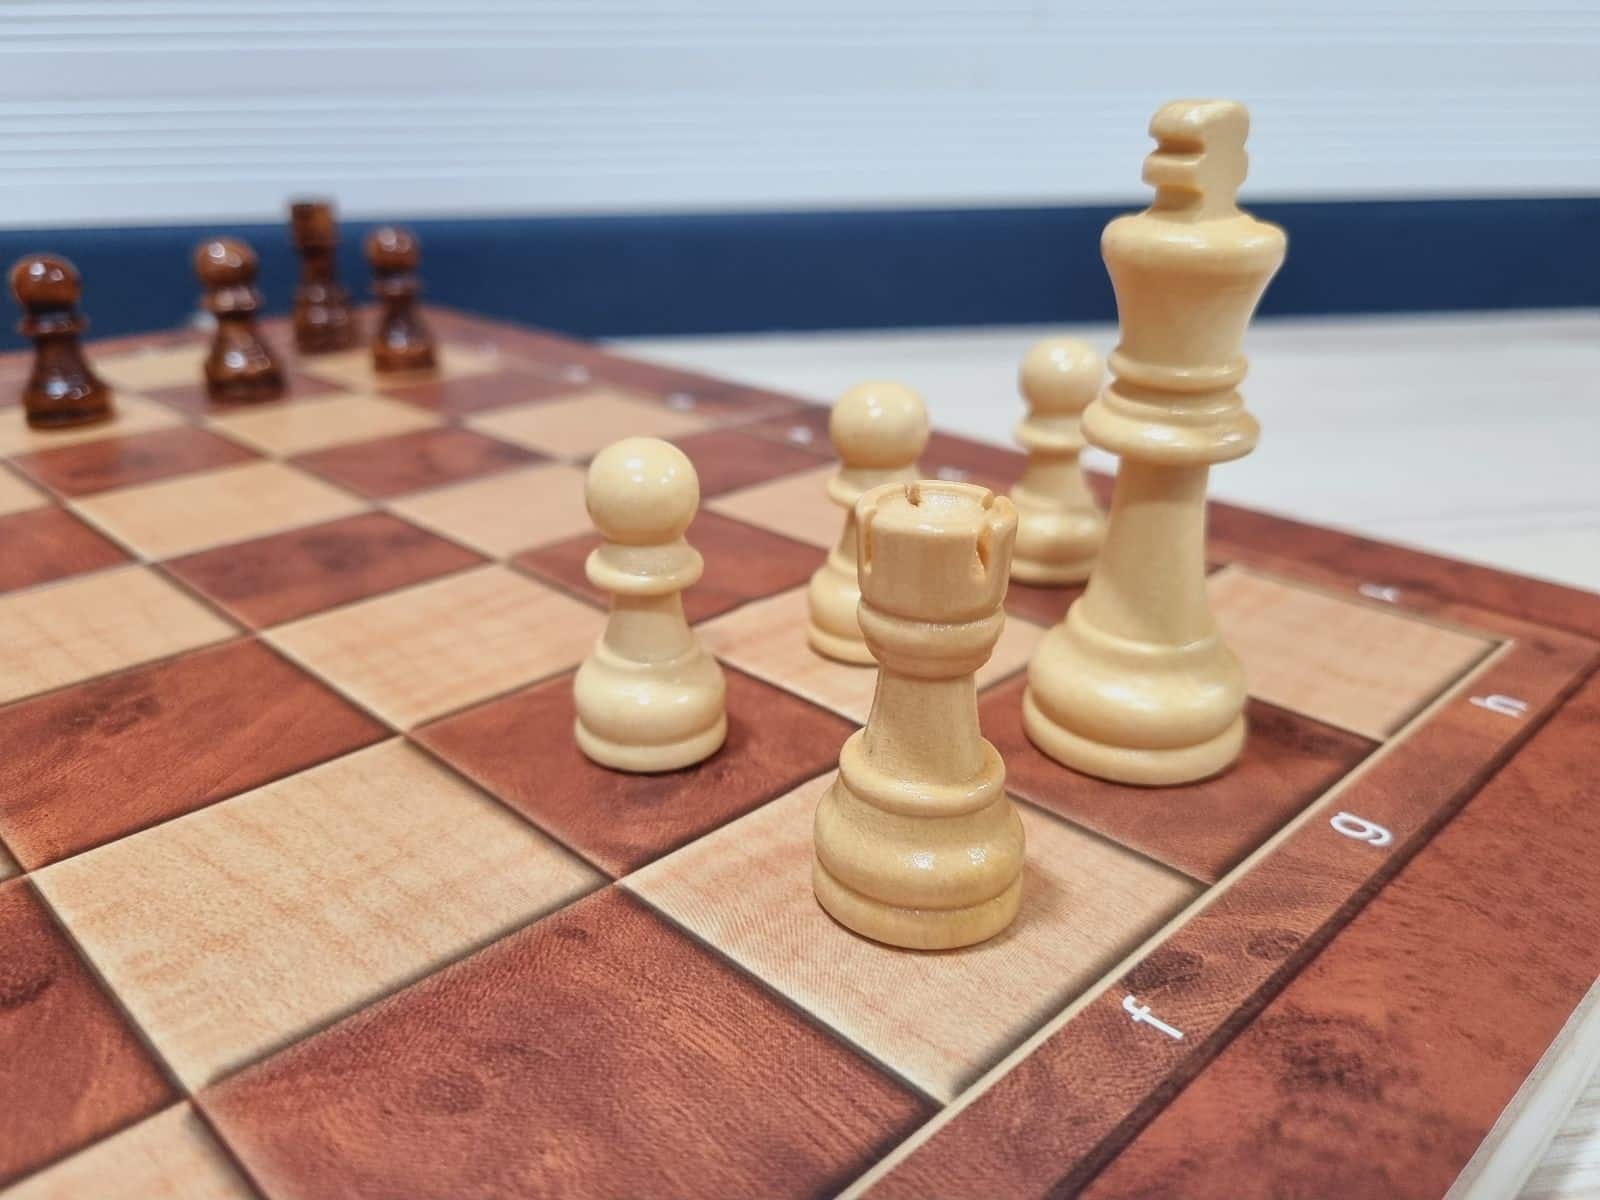 Why Is Castling Important In Chess?